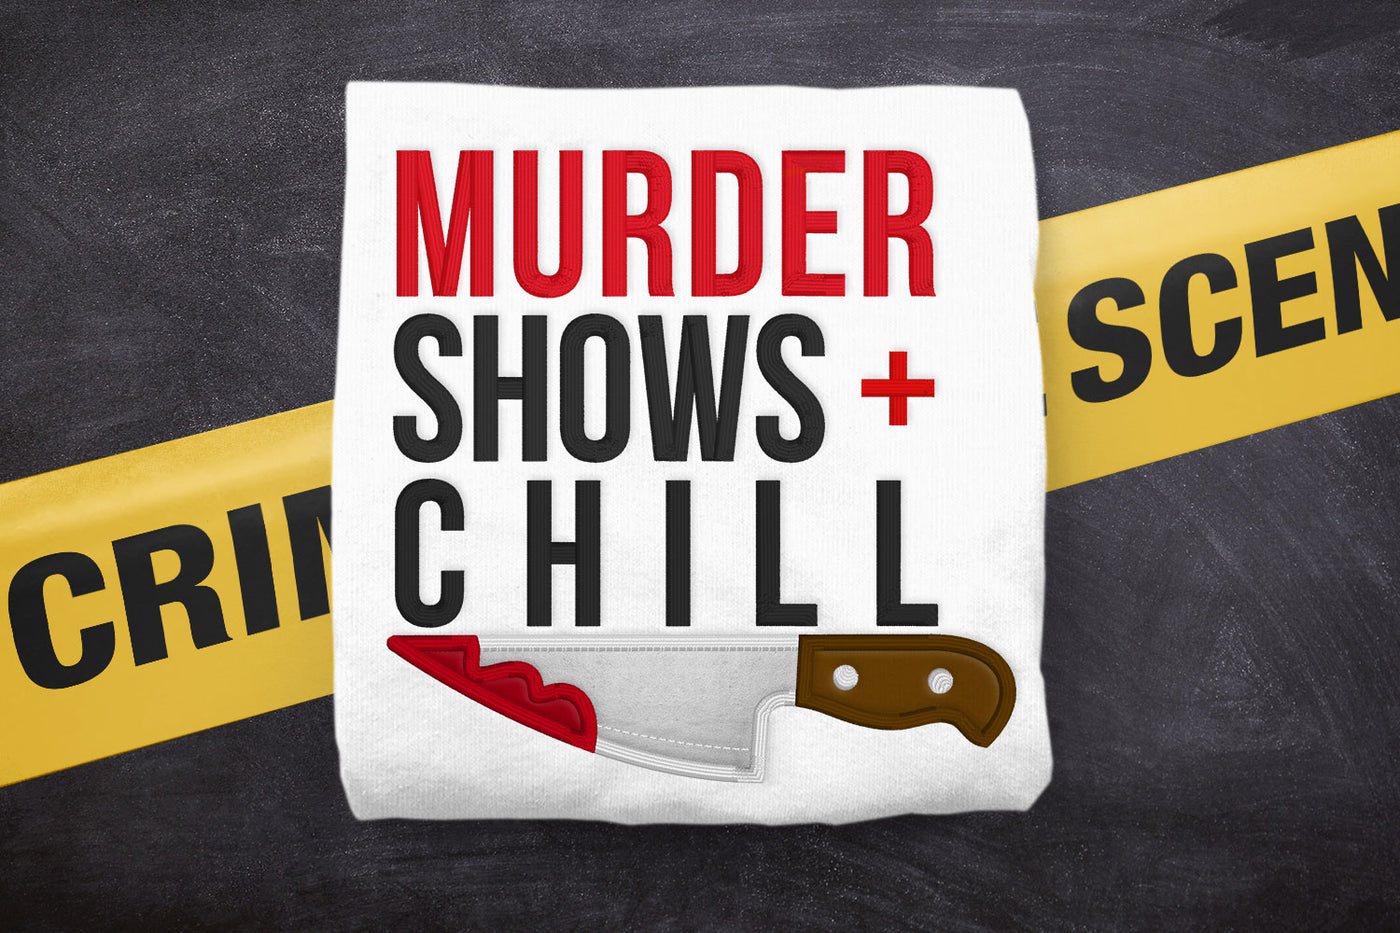 Murder Shows and Chill with Knife Applique Embroidery